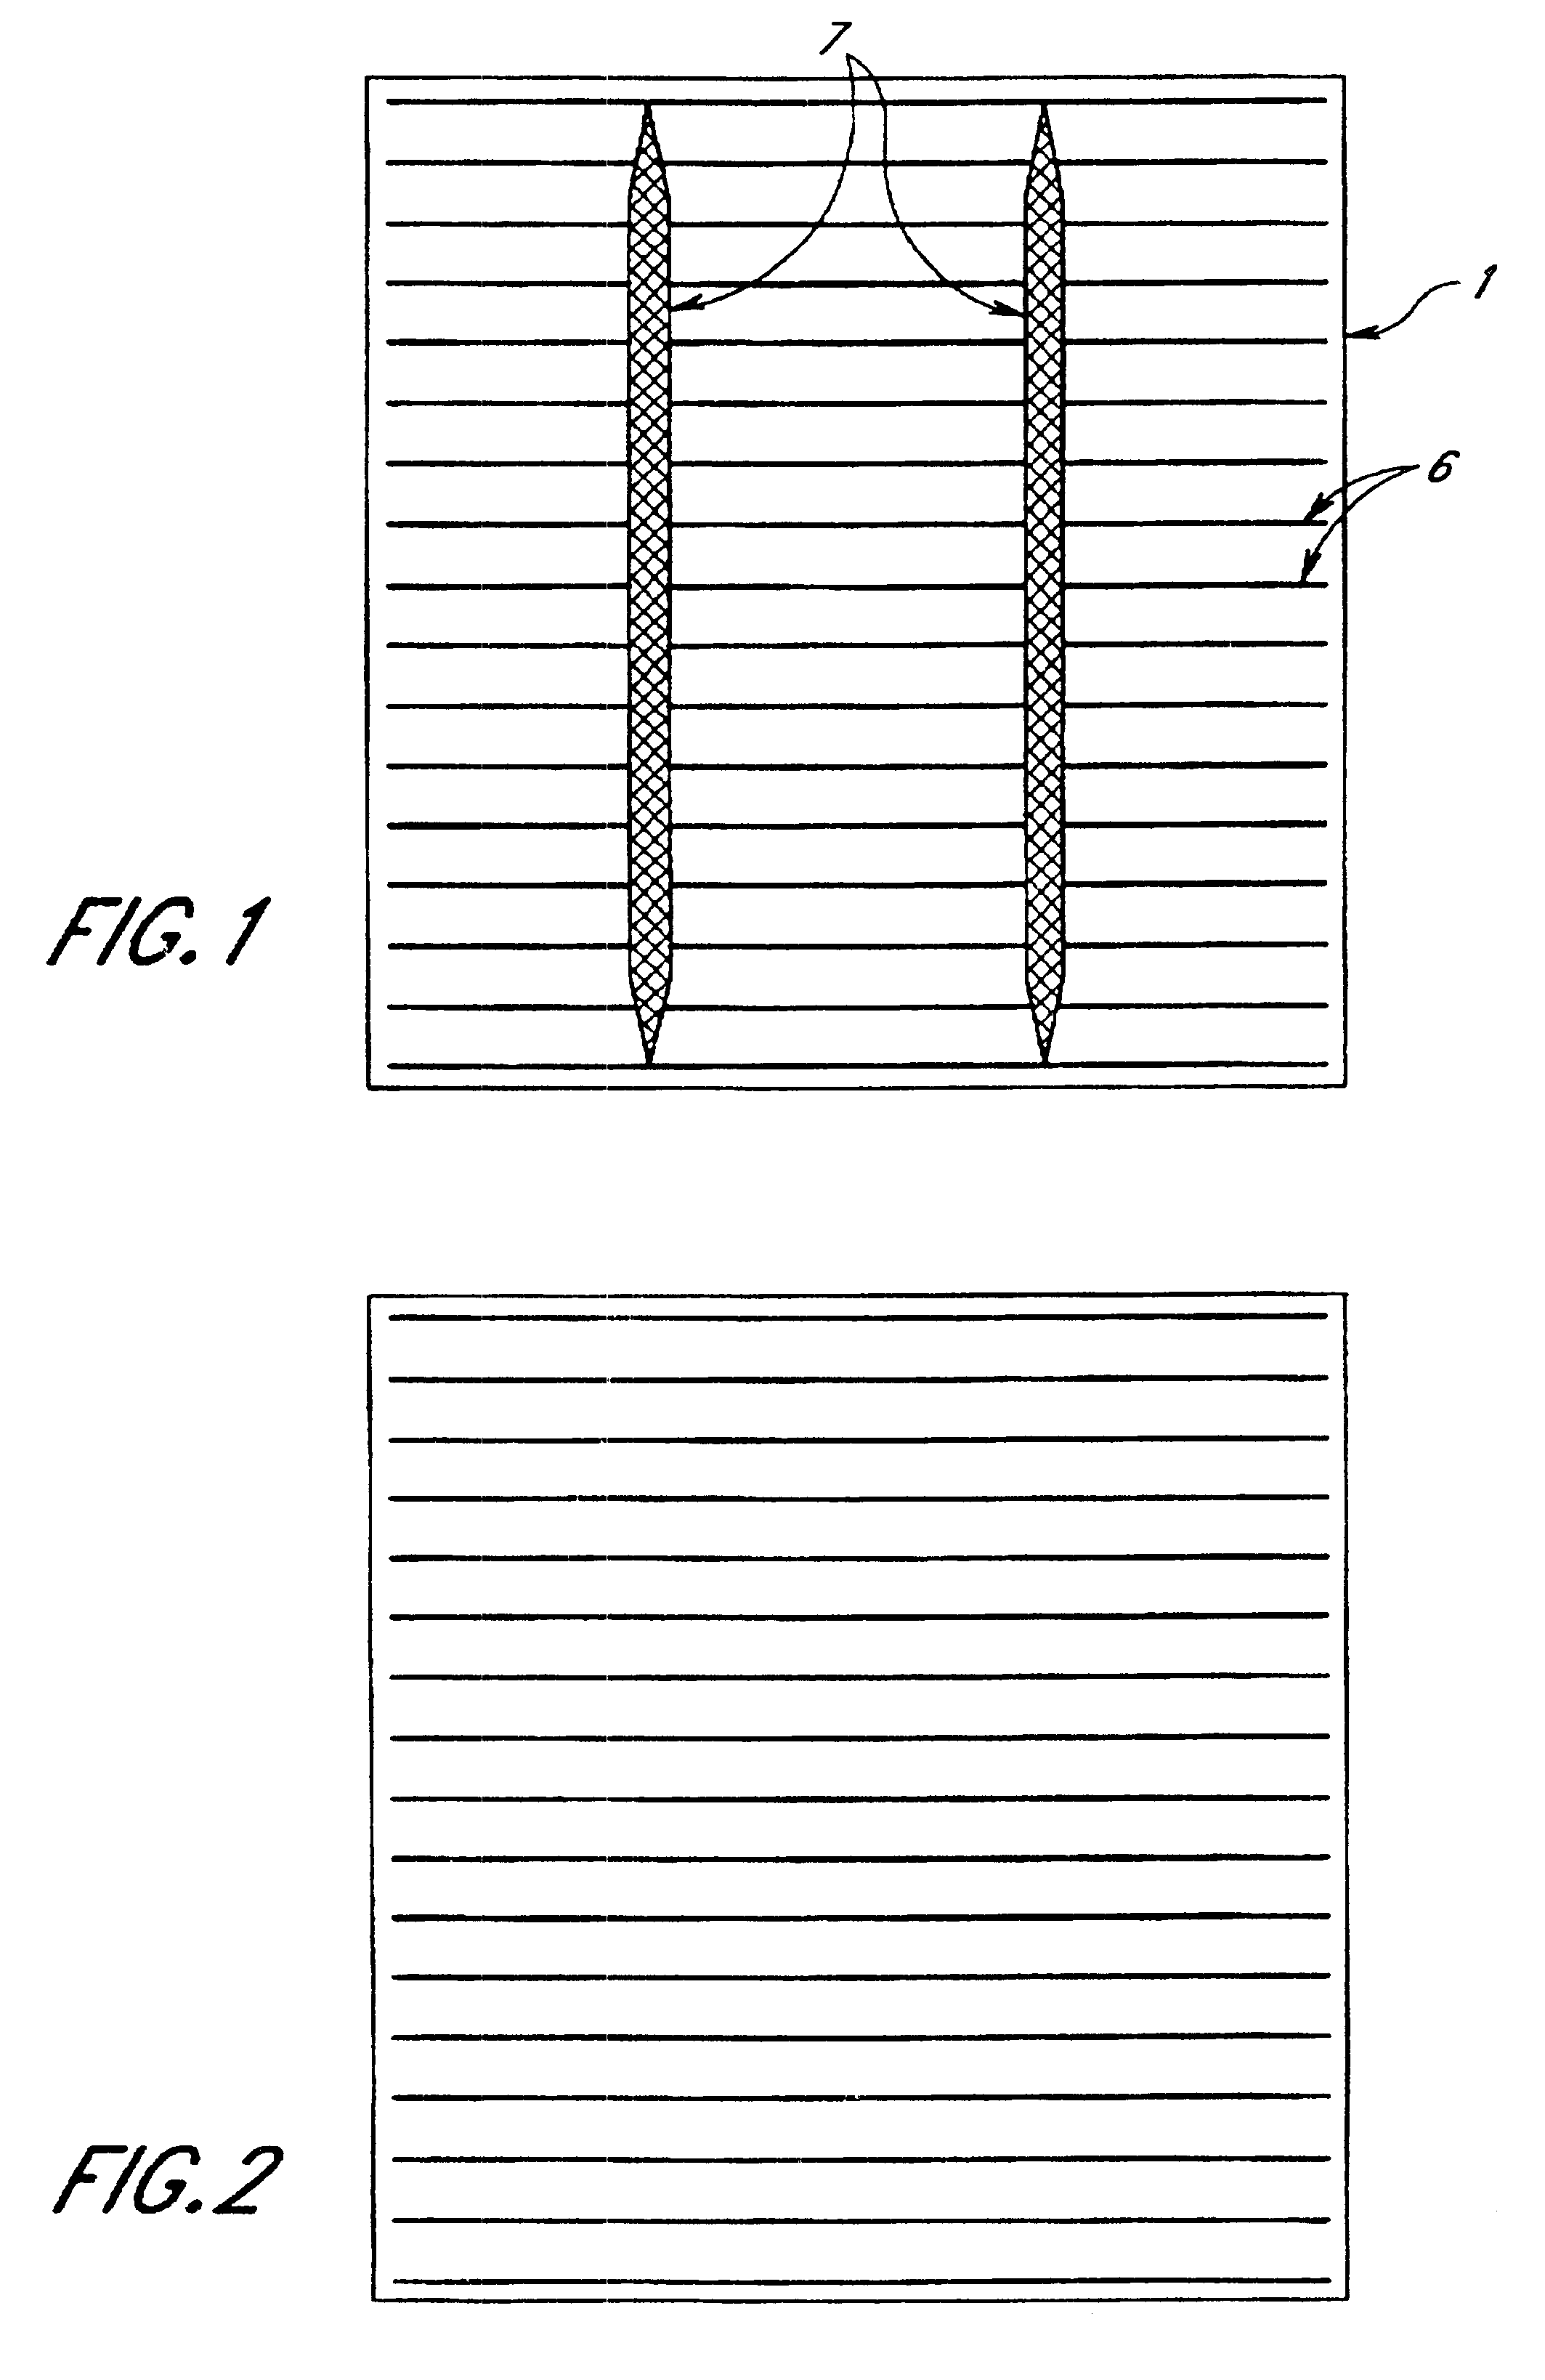 Method of preparing solar cell front contacts